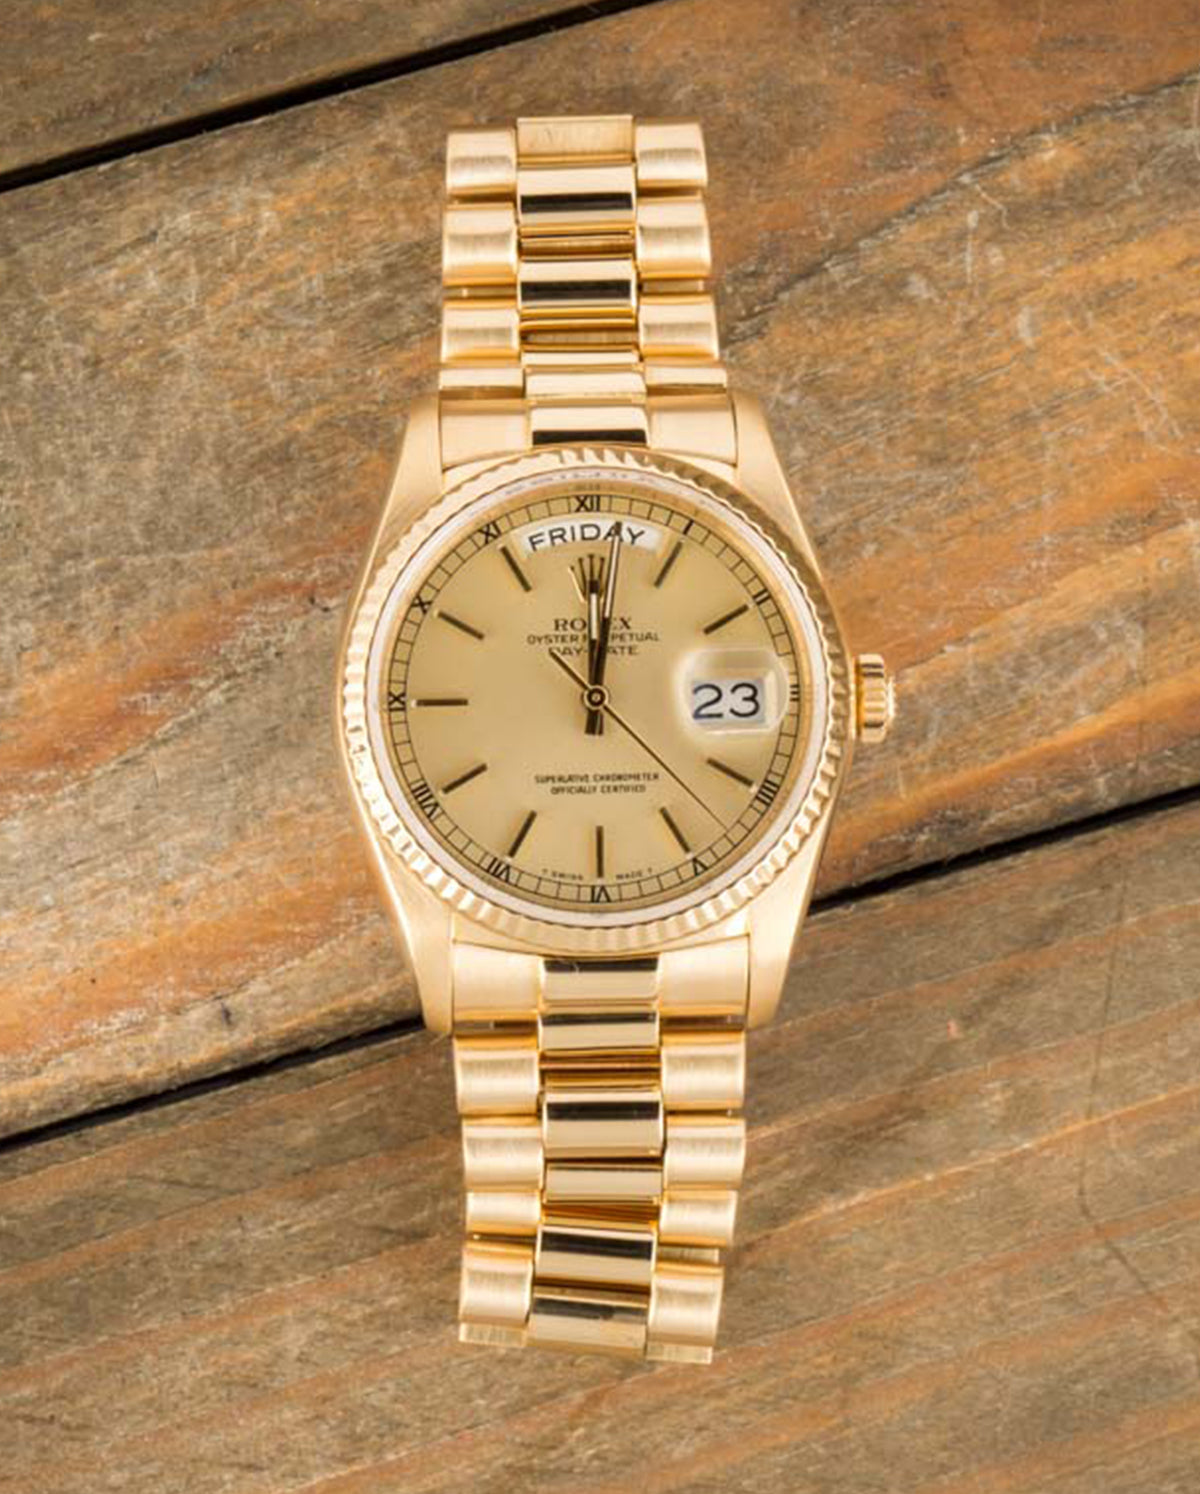 Rolex Day-Date Yellow Gold